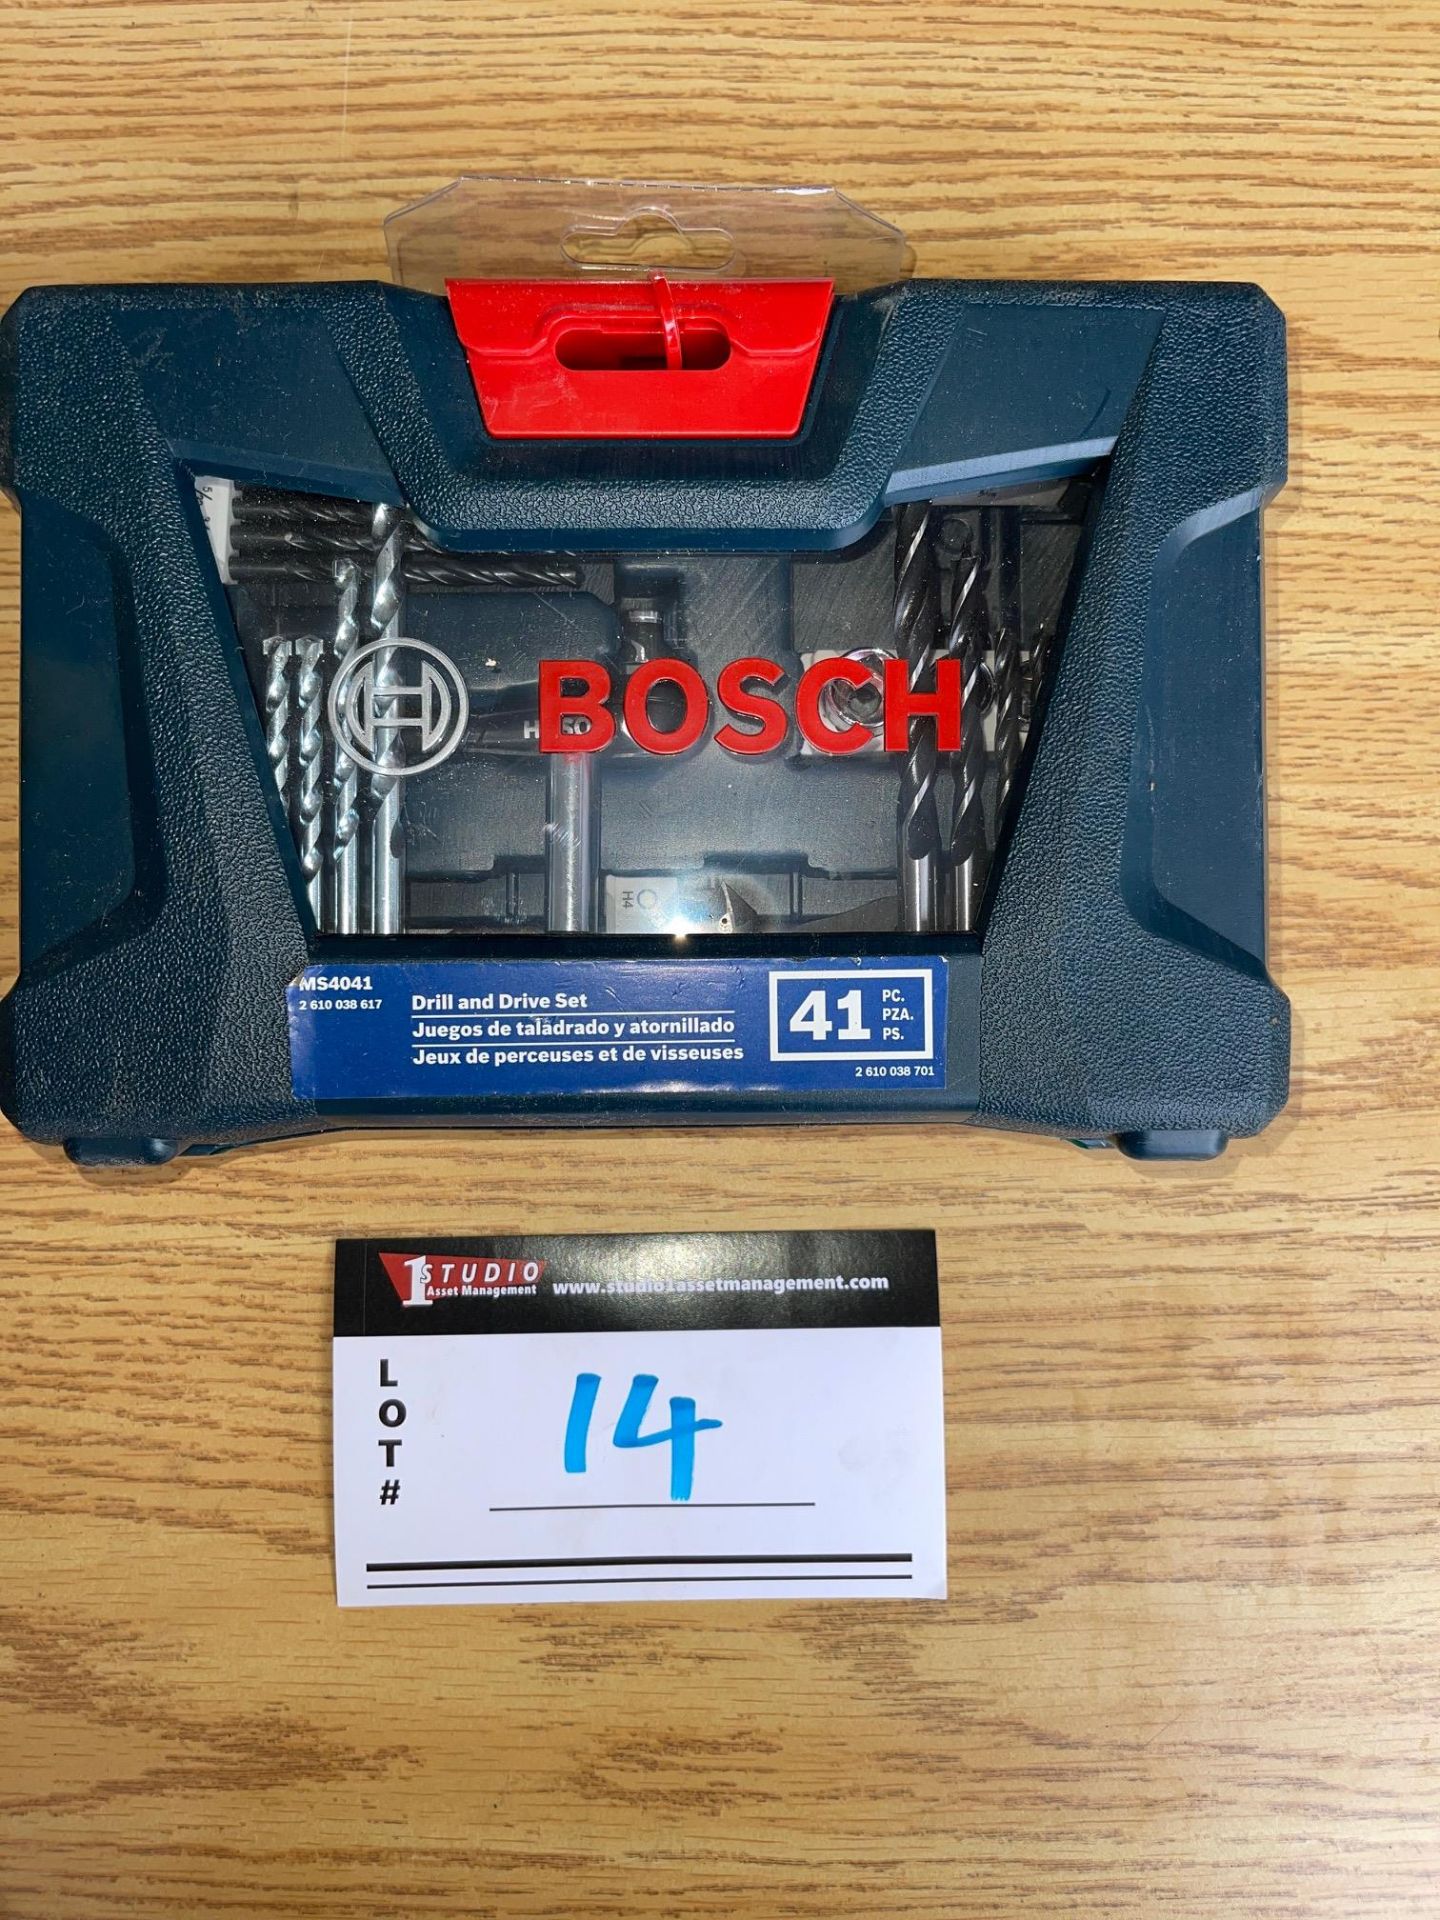 BOSCH DRILL AND DRIVE SET, 41 PC